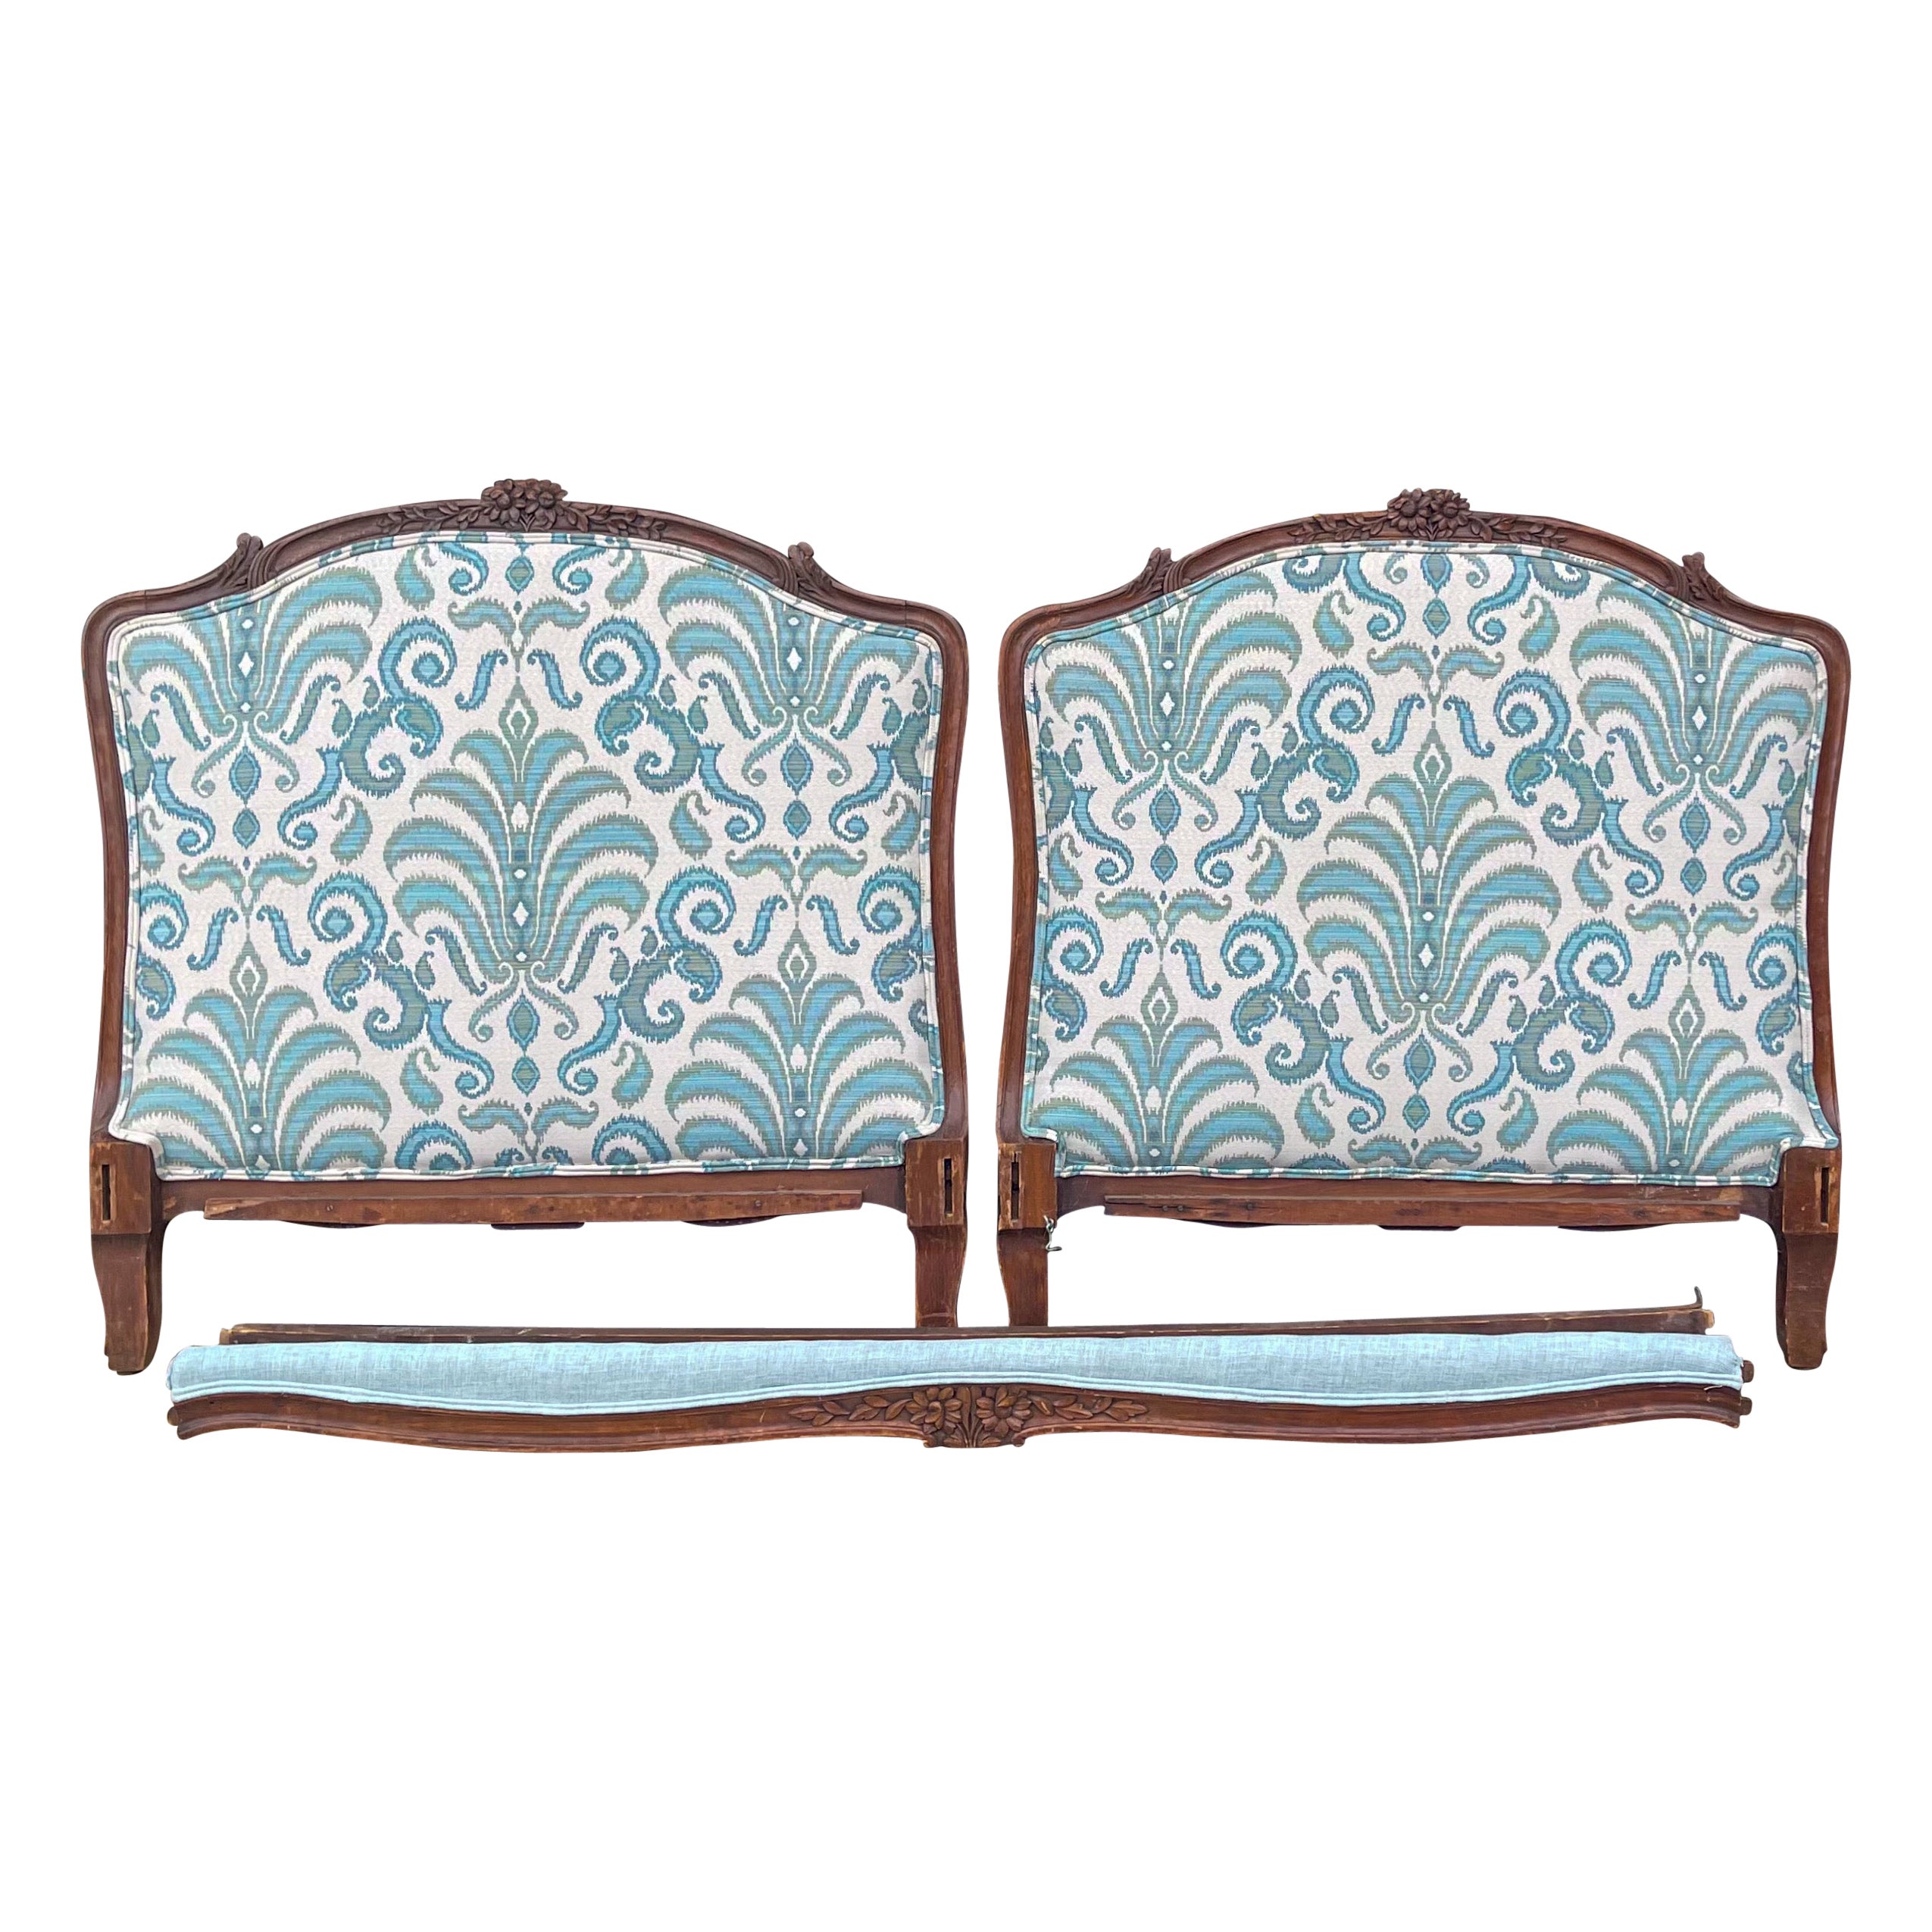 Early 20th-C. French Carved Oak Daybed or Twin Headboards in Turquoise